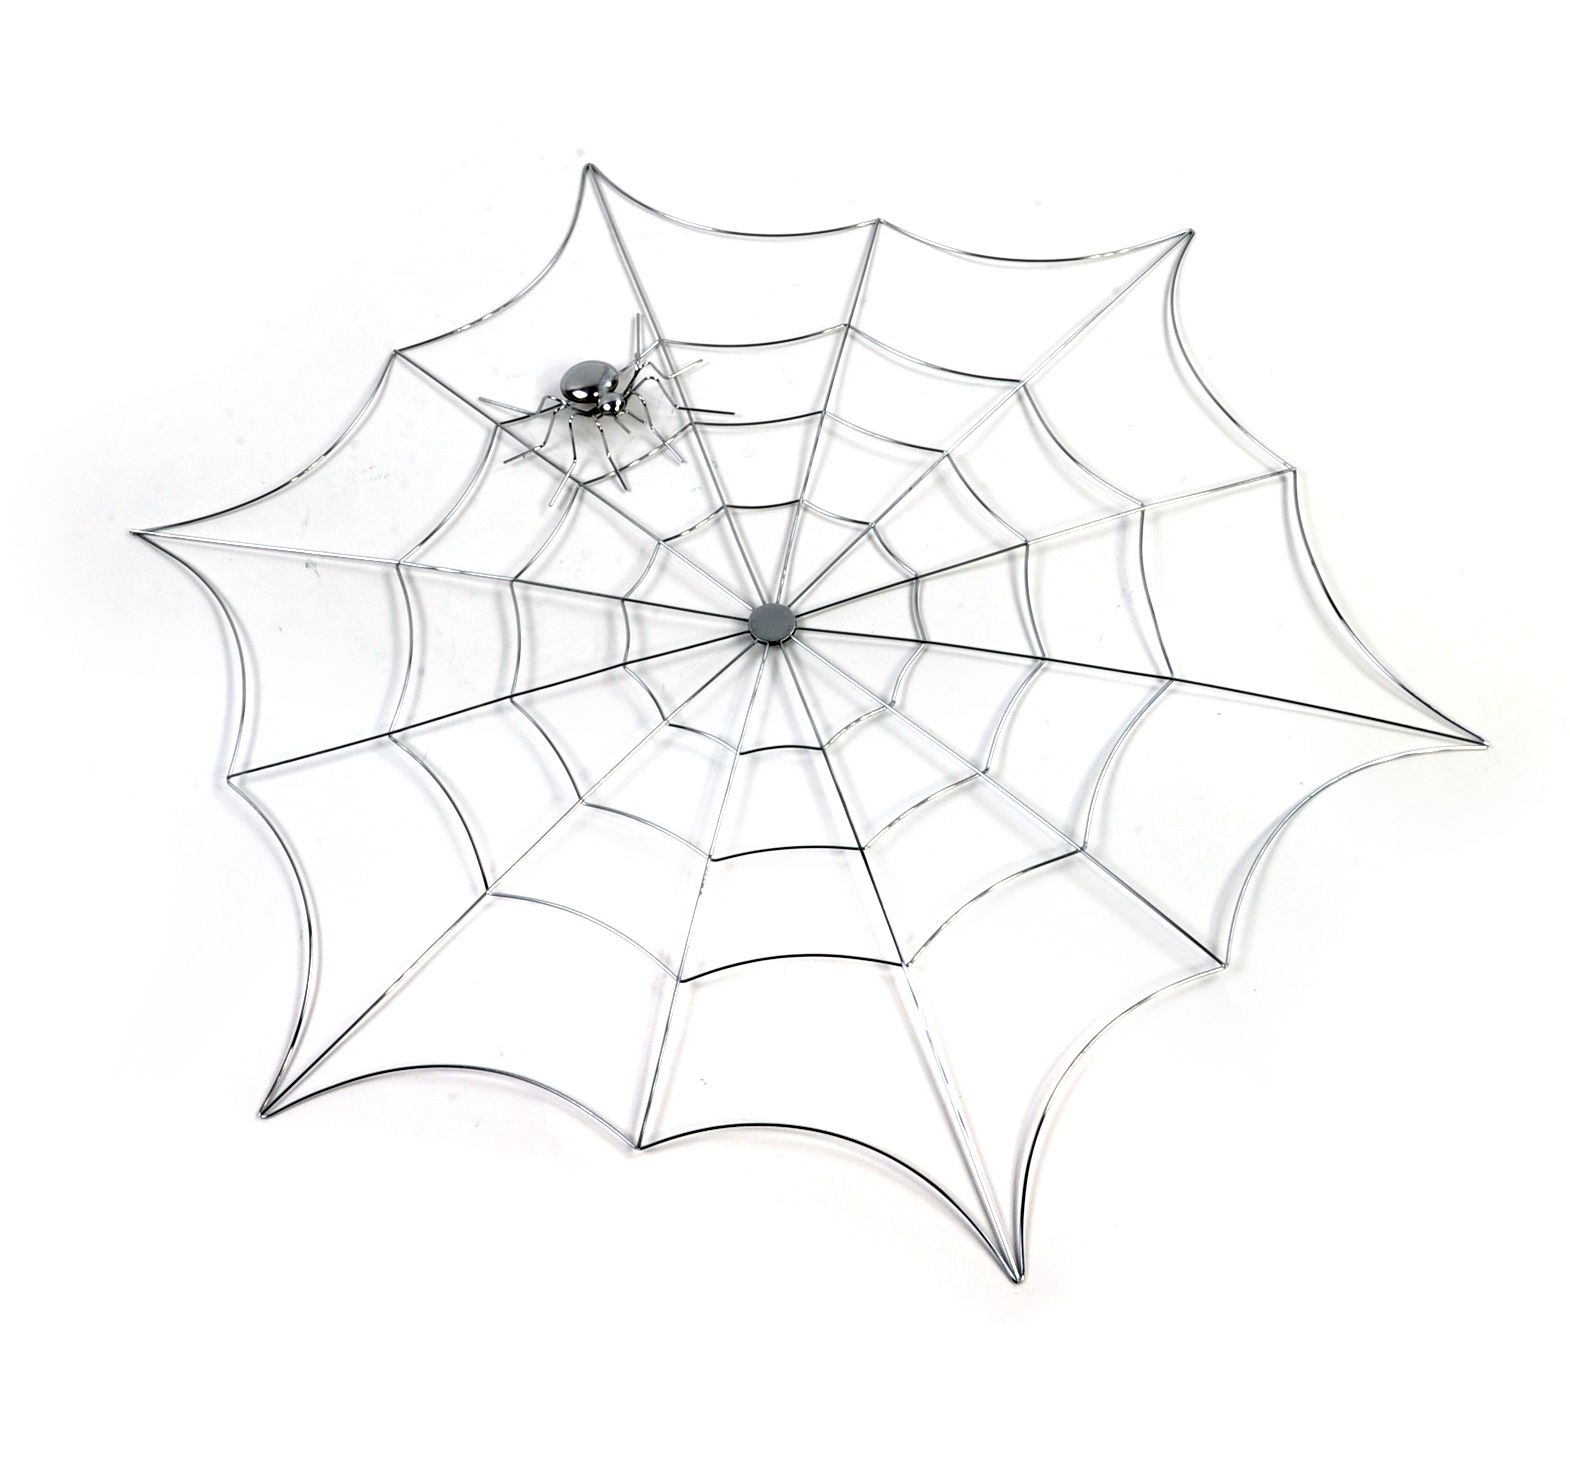 /Spider And Web – 21" / 53Cm Metal Wall Decor | Pink Cat Shop With Web Wall Art (View 11 of 15)